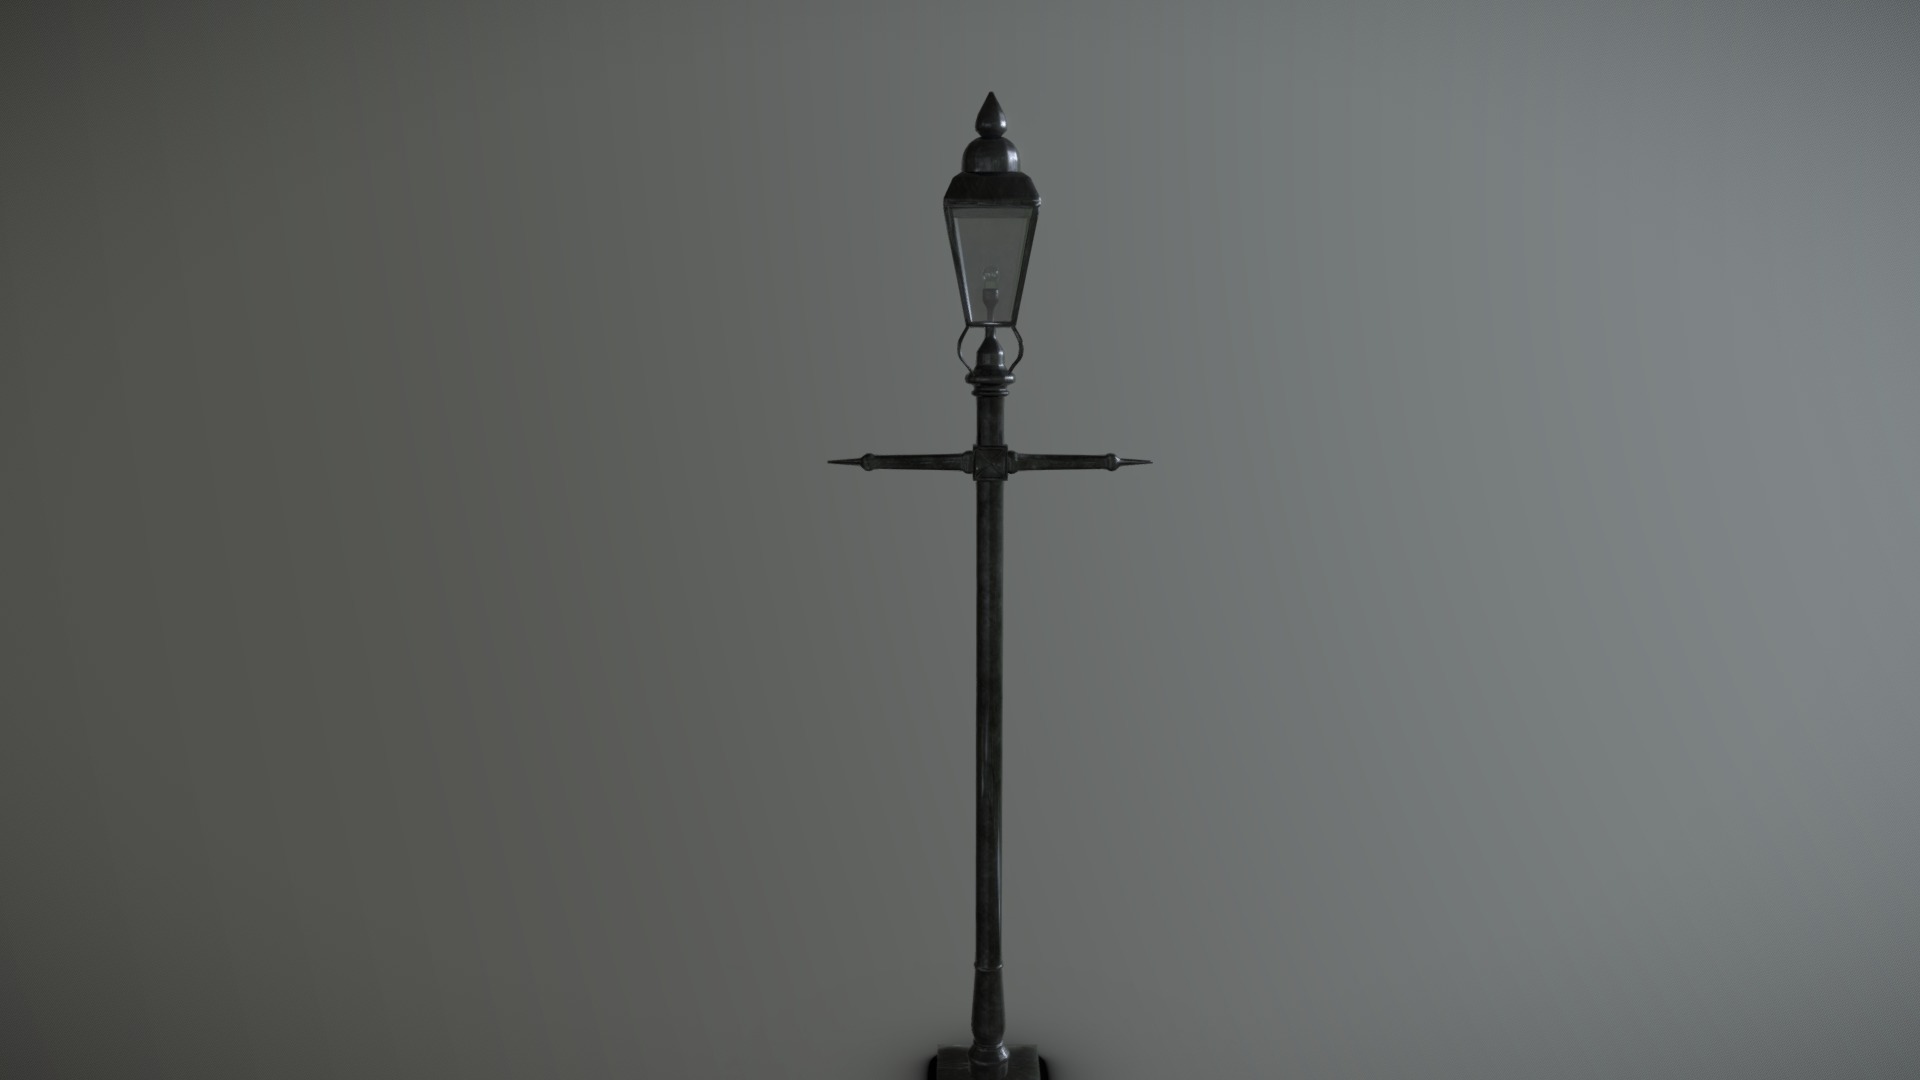 3D model Victorian Lamp - This is a 3D model of the Victorian Lamp. The 3D model is about a lamp post with a light on top.